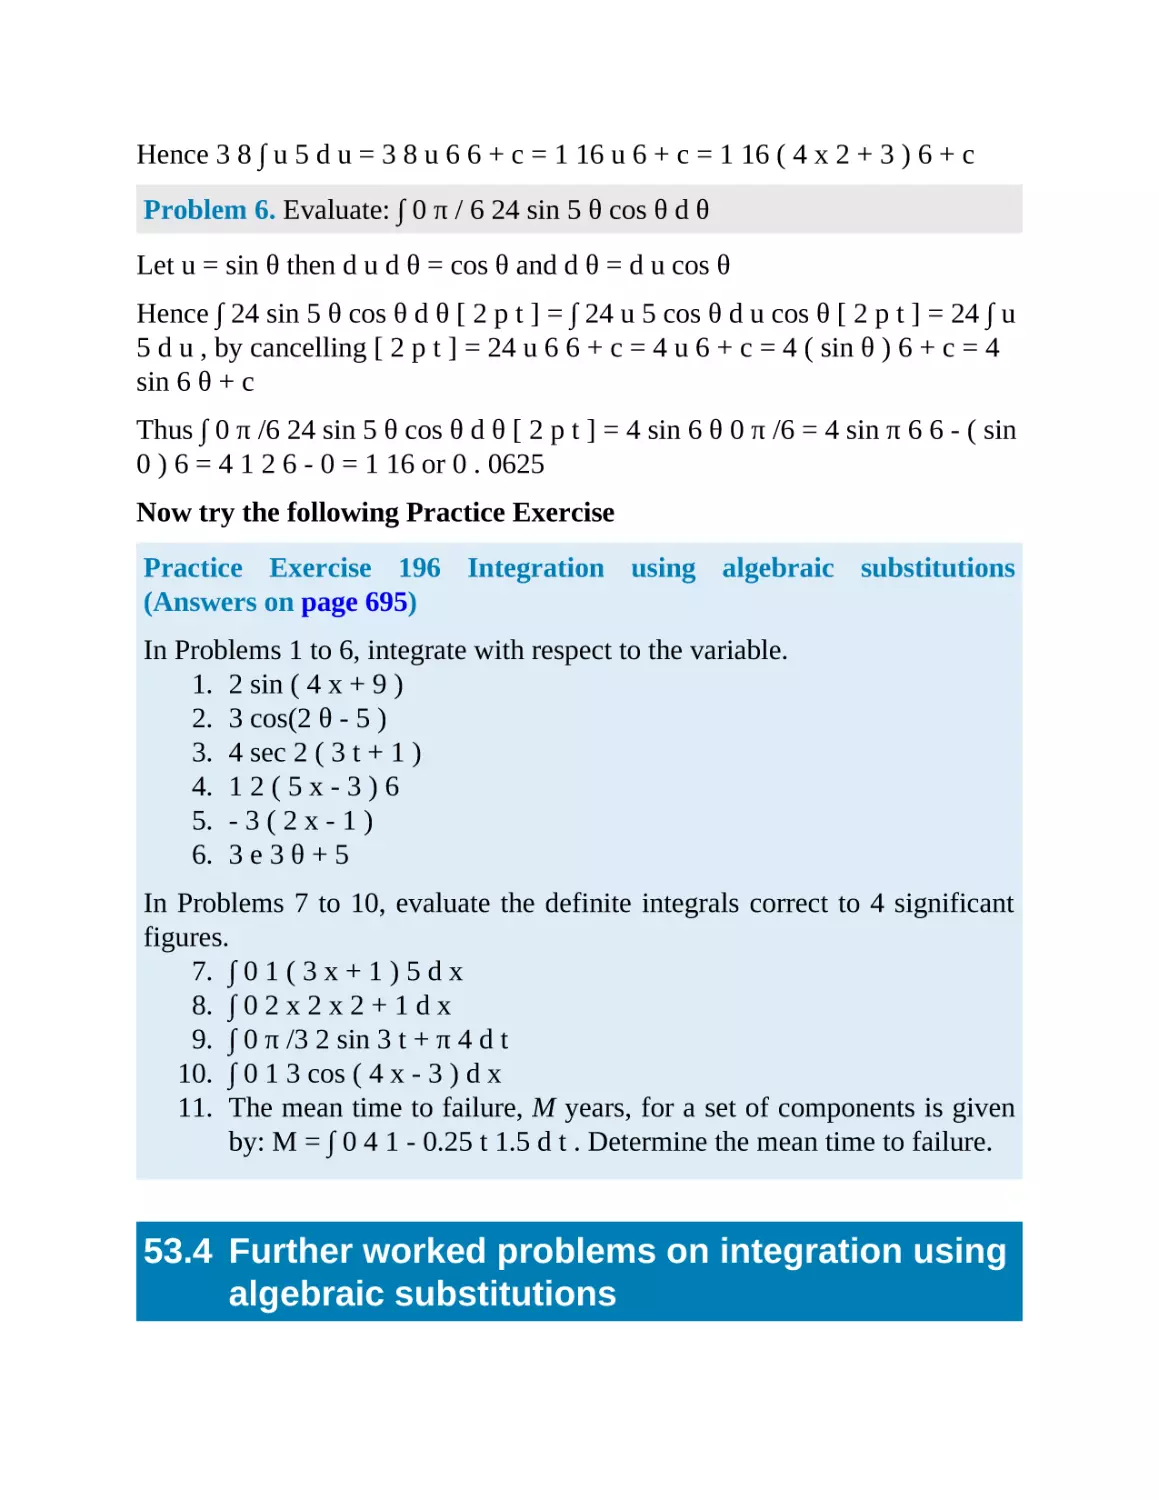 53.4 Further worked problems on integration using algebraic substitutions